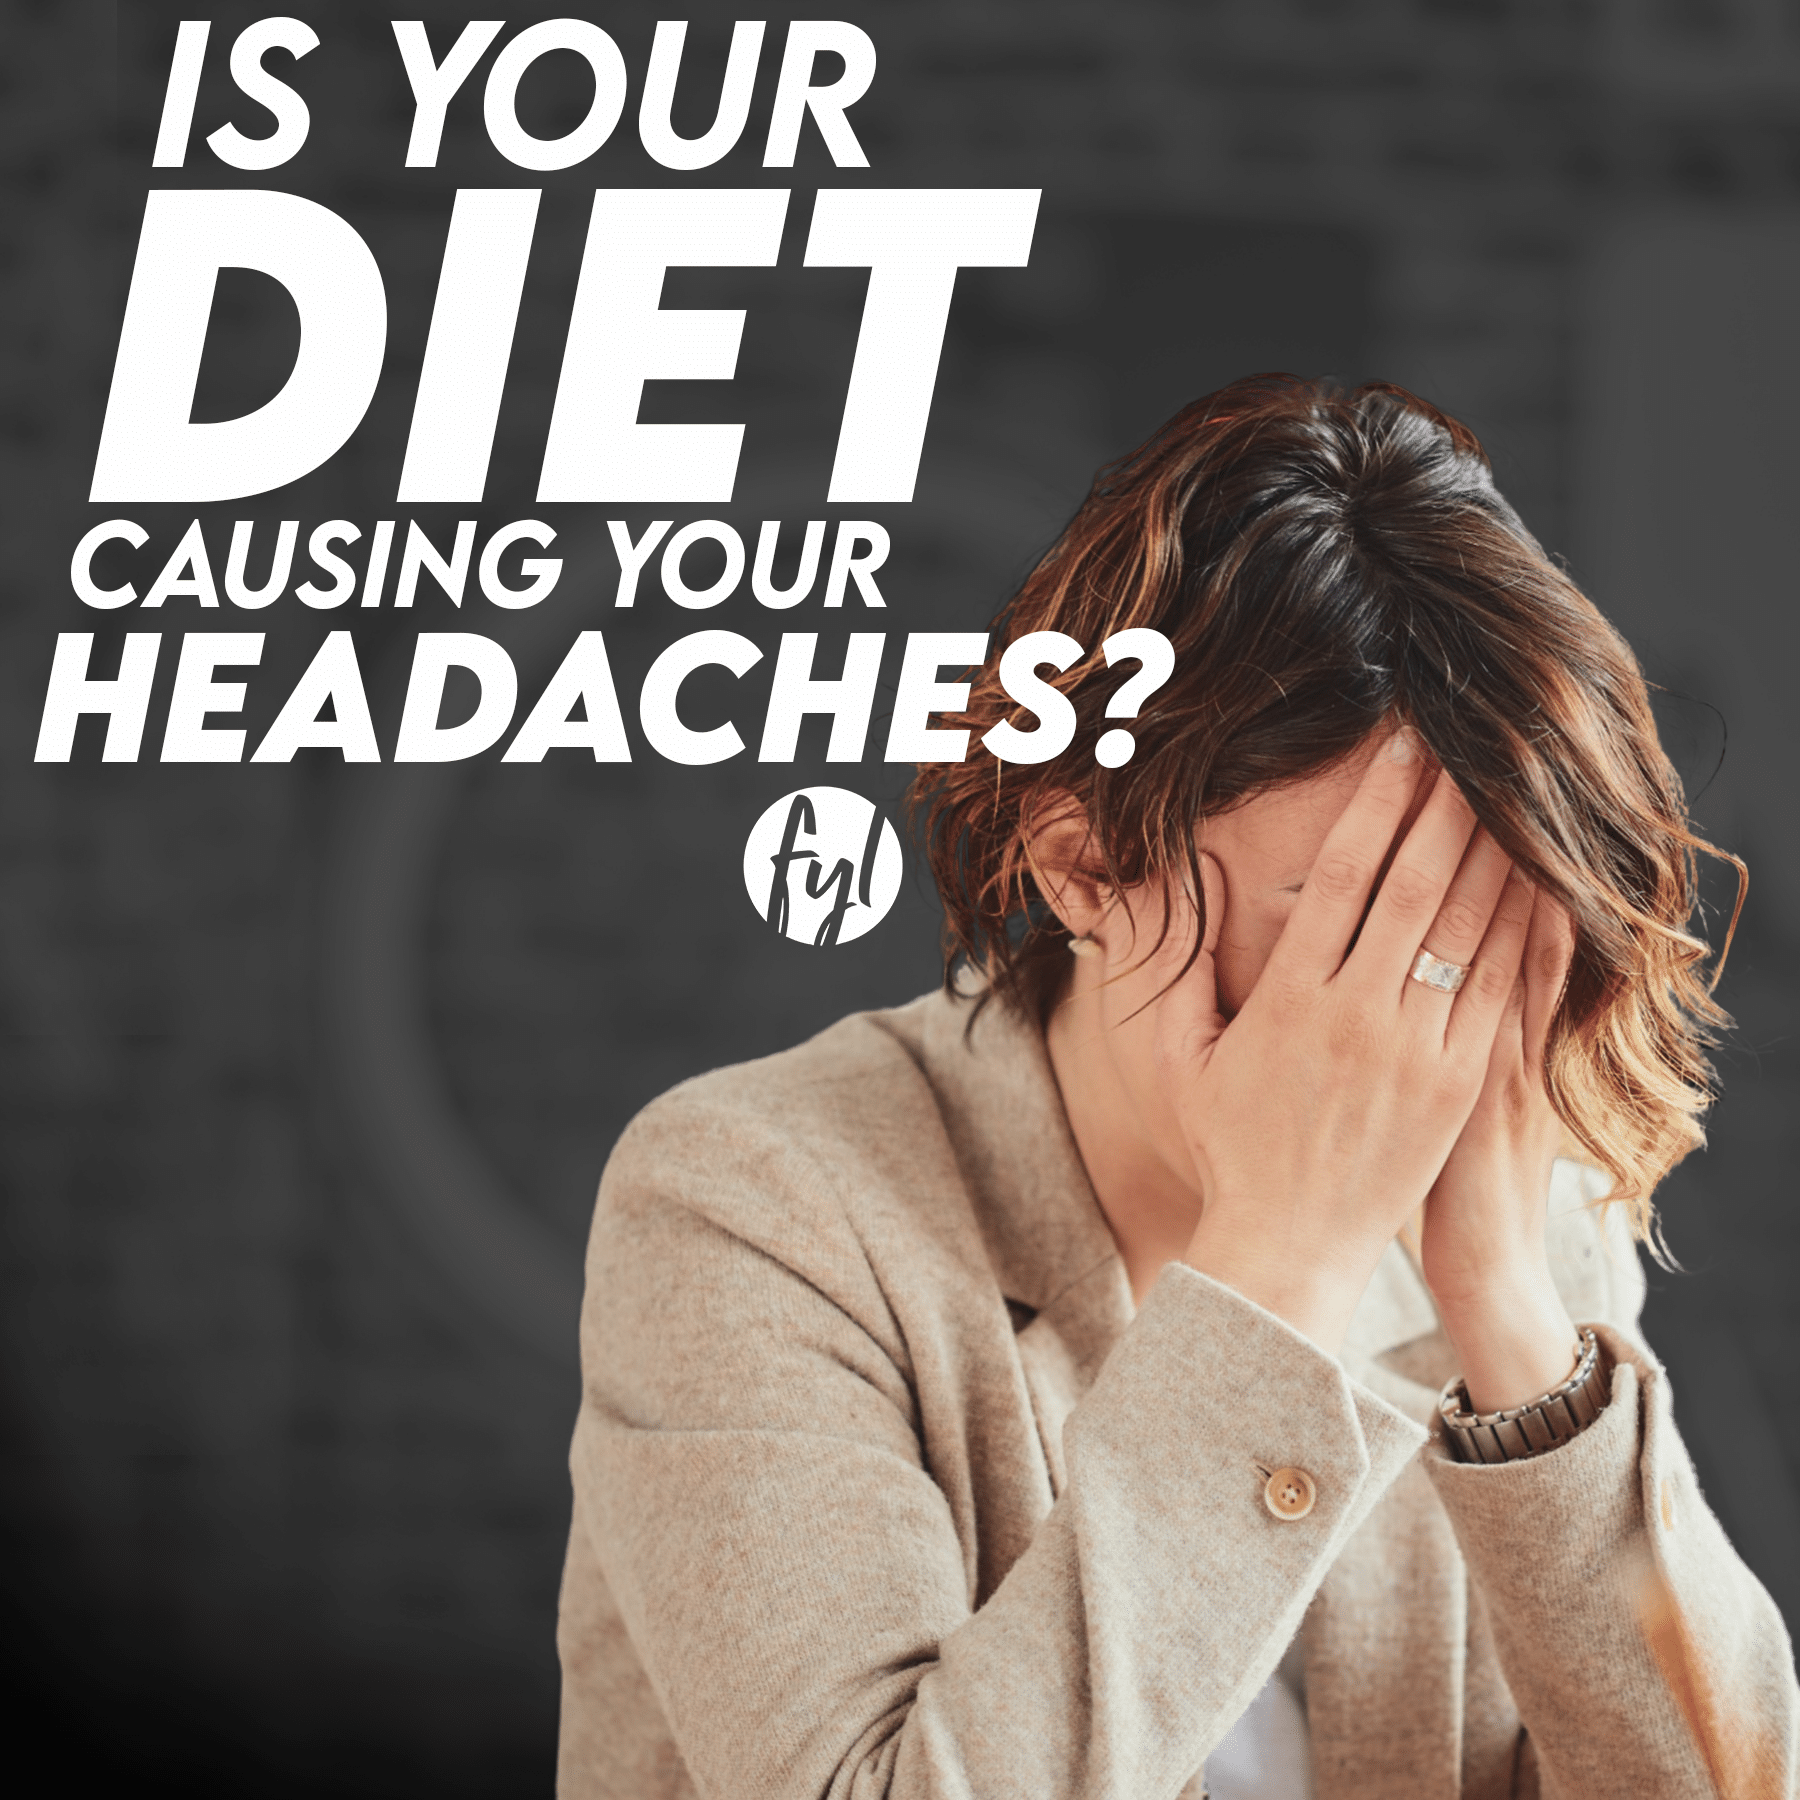 Is Your Diet Causing Your Headaches?